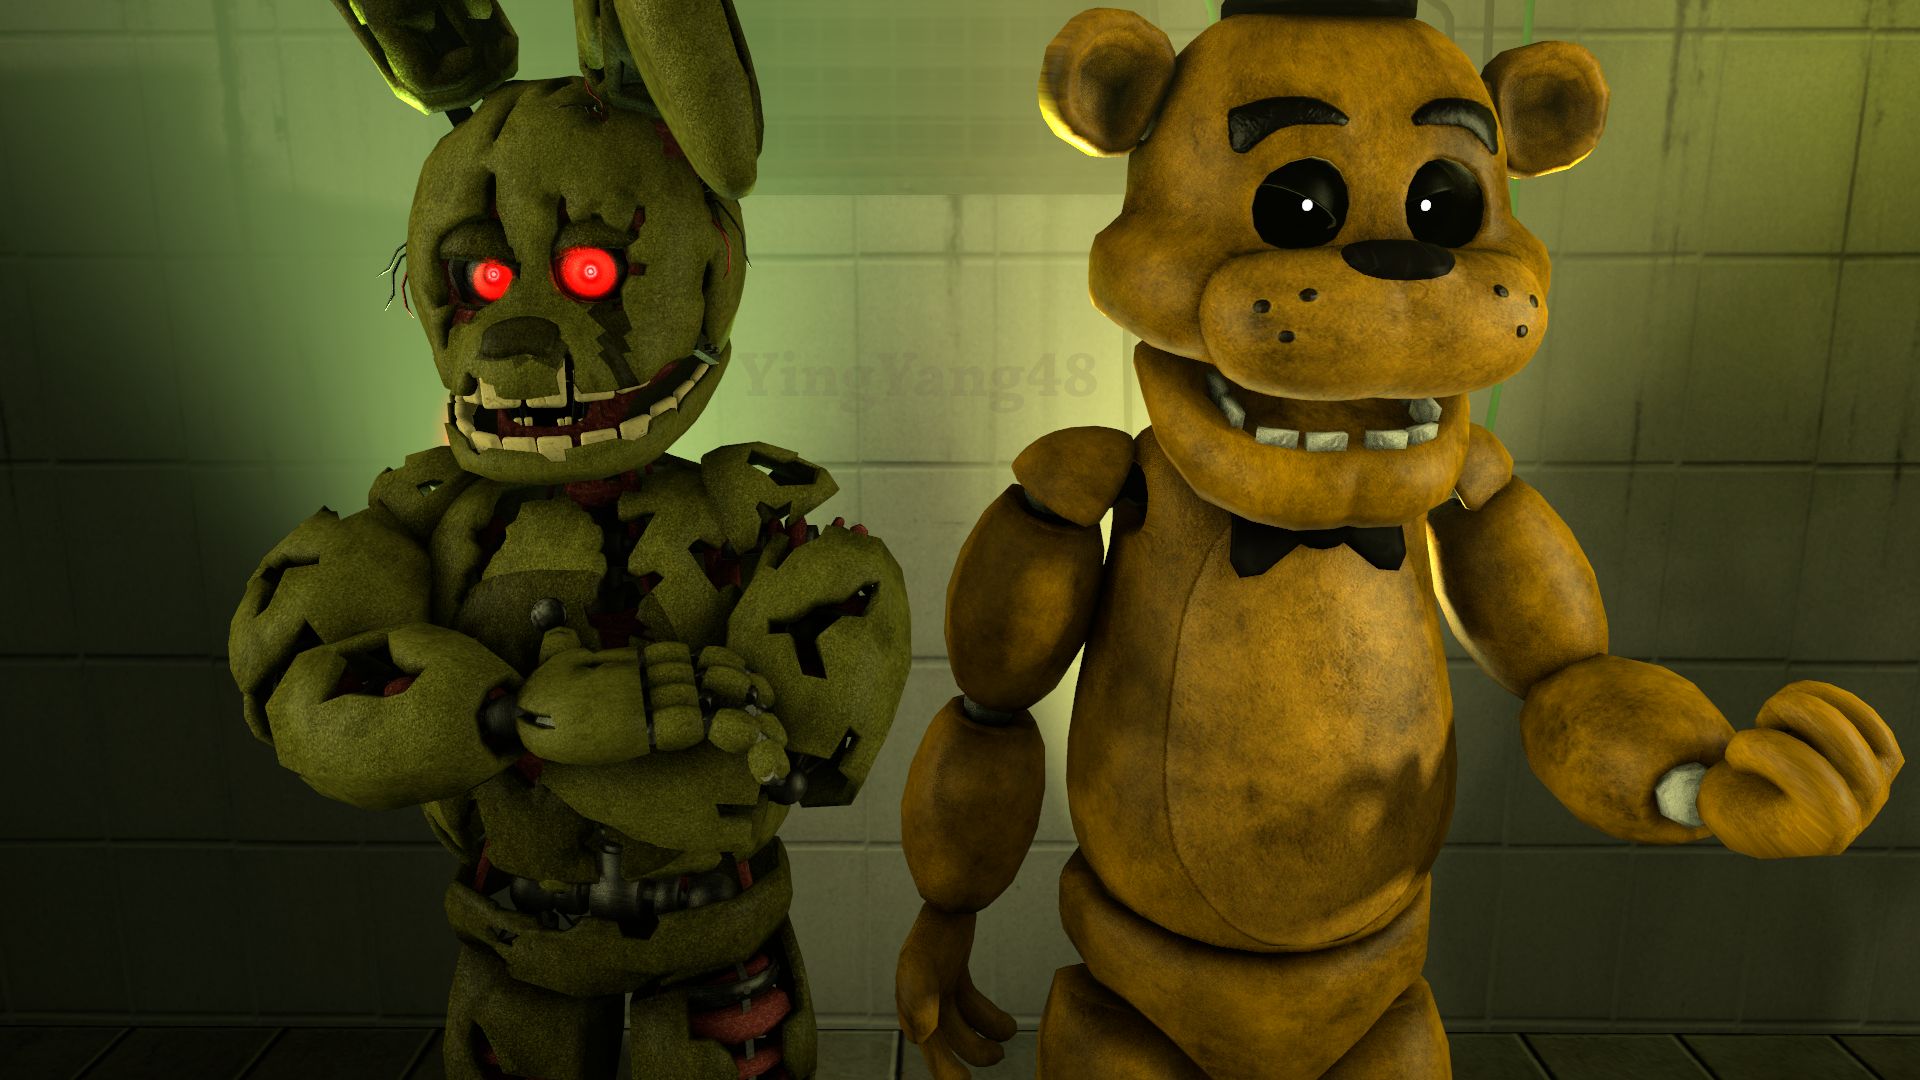 Five Nights at Freddy's 3 - Download for PC Free